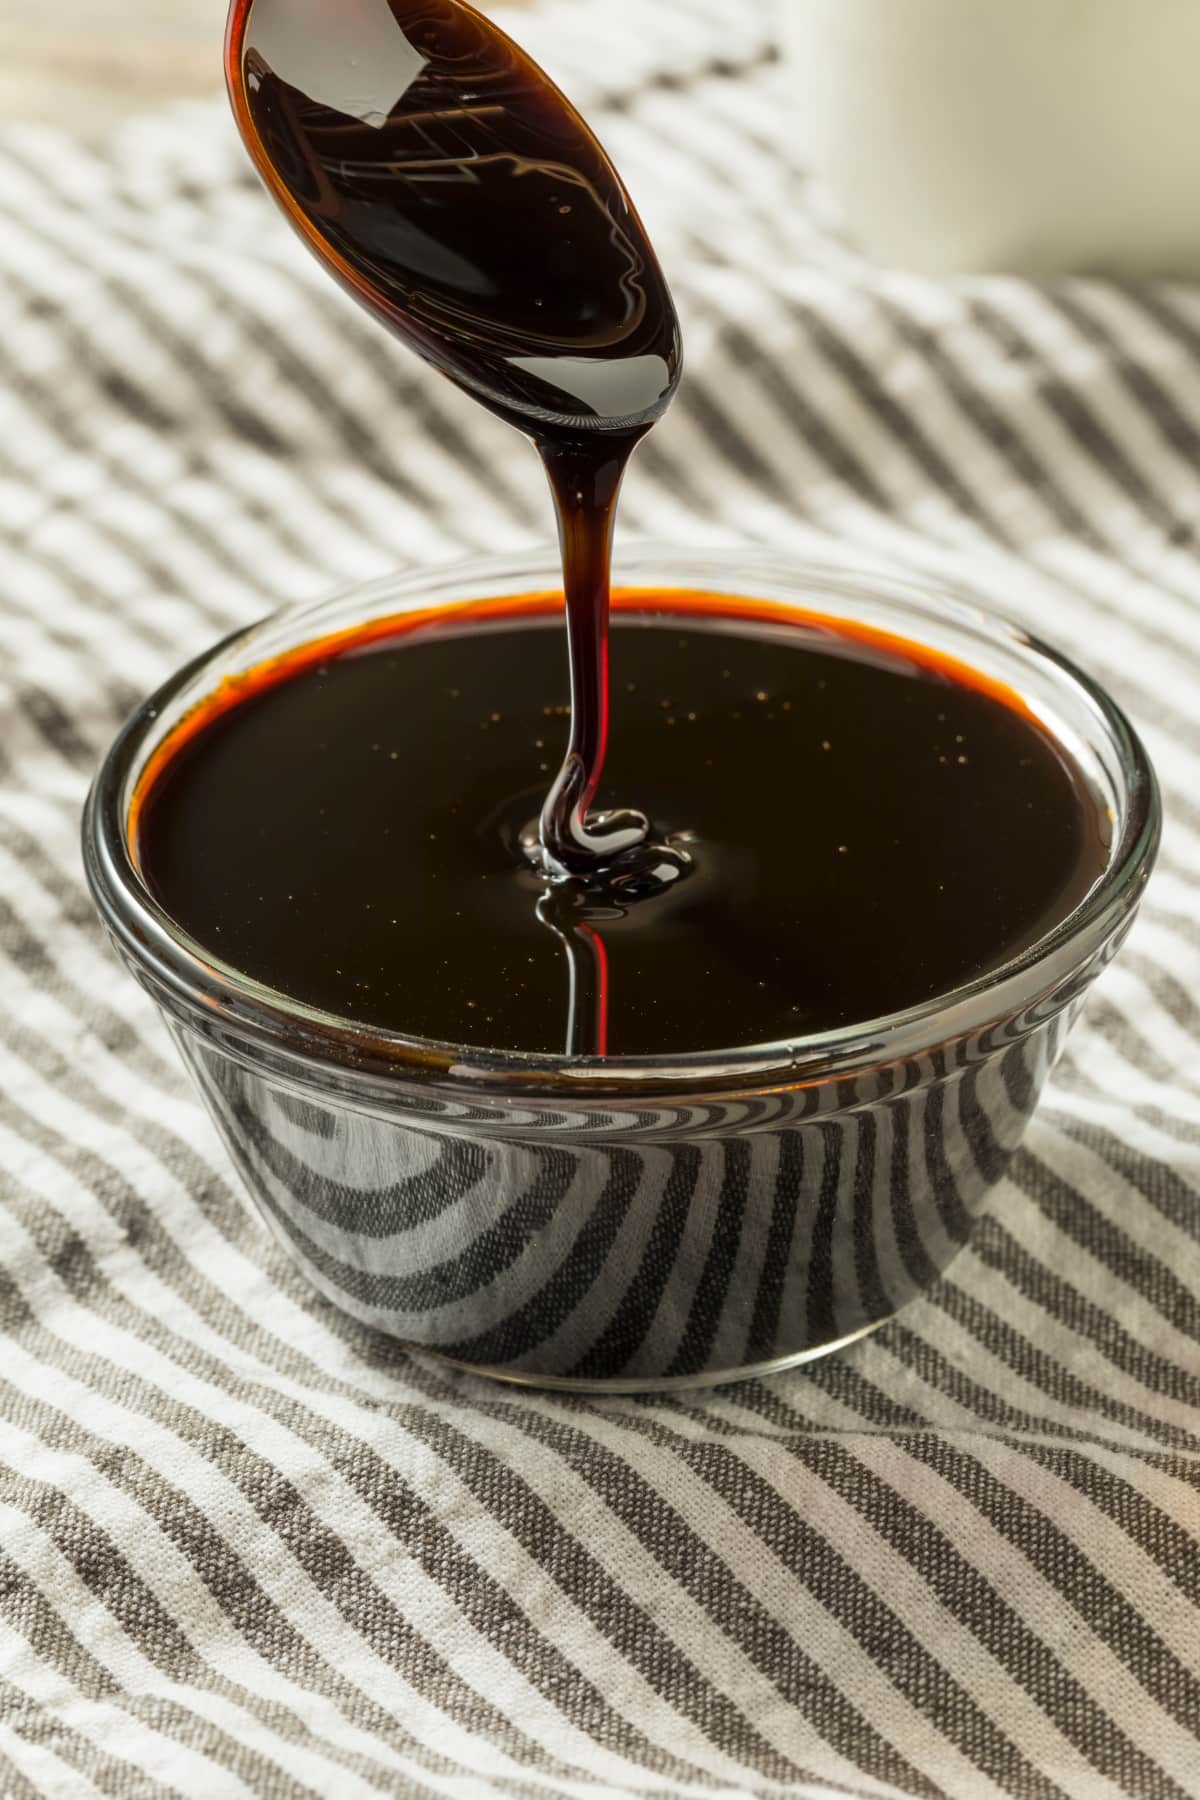 Thick Molasses Syrup Dripping From a Spoon To a Small Glass Bowl